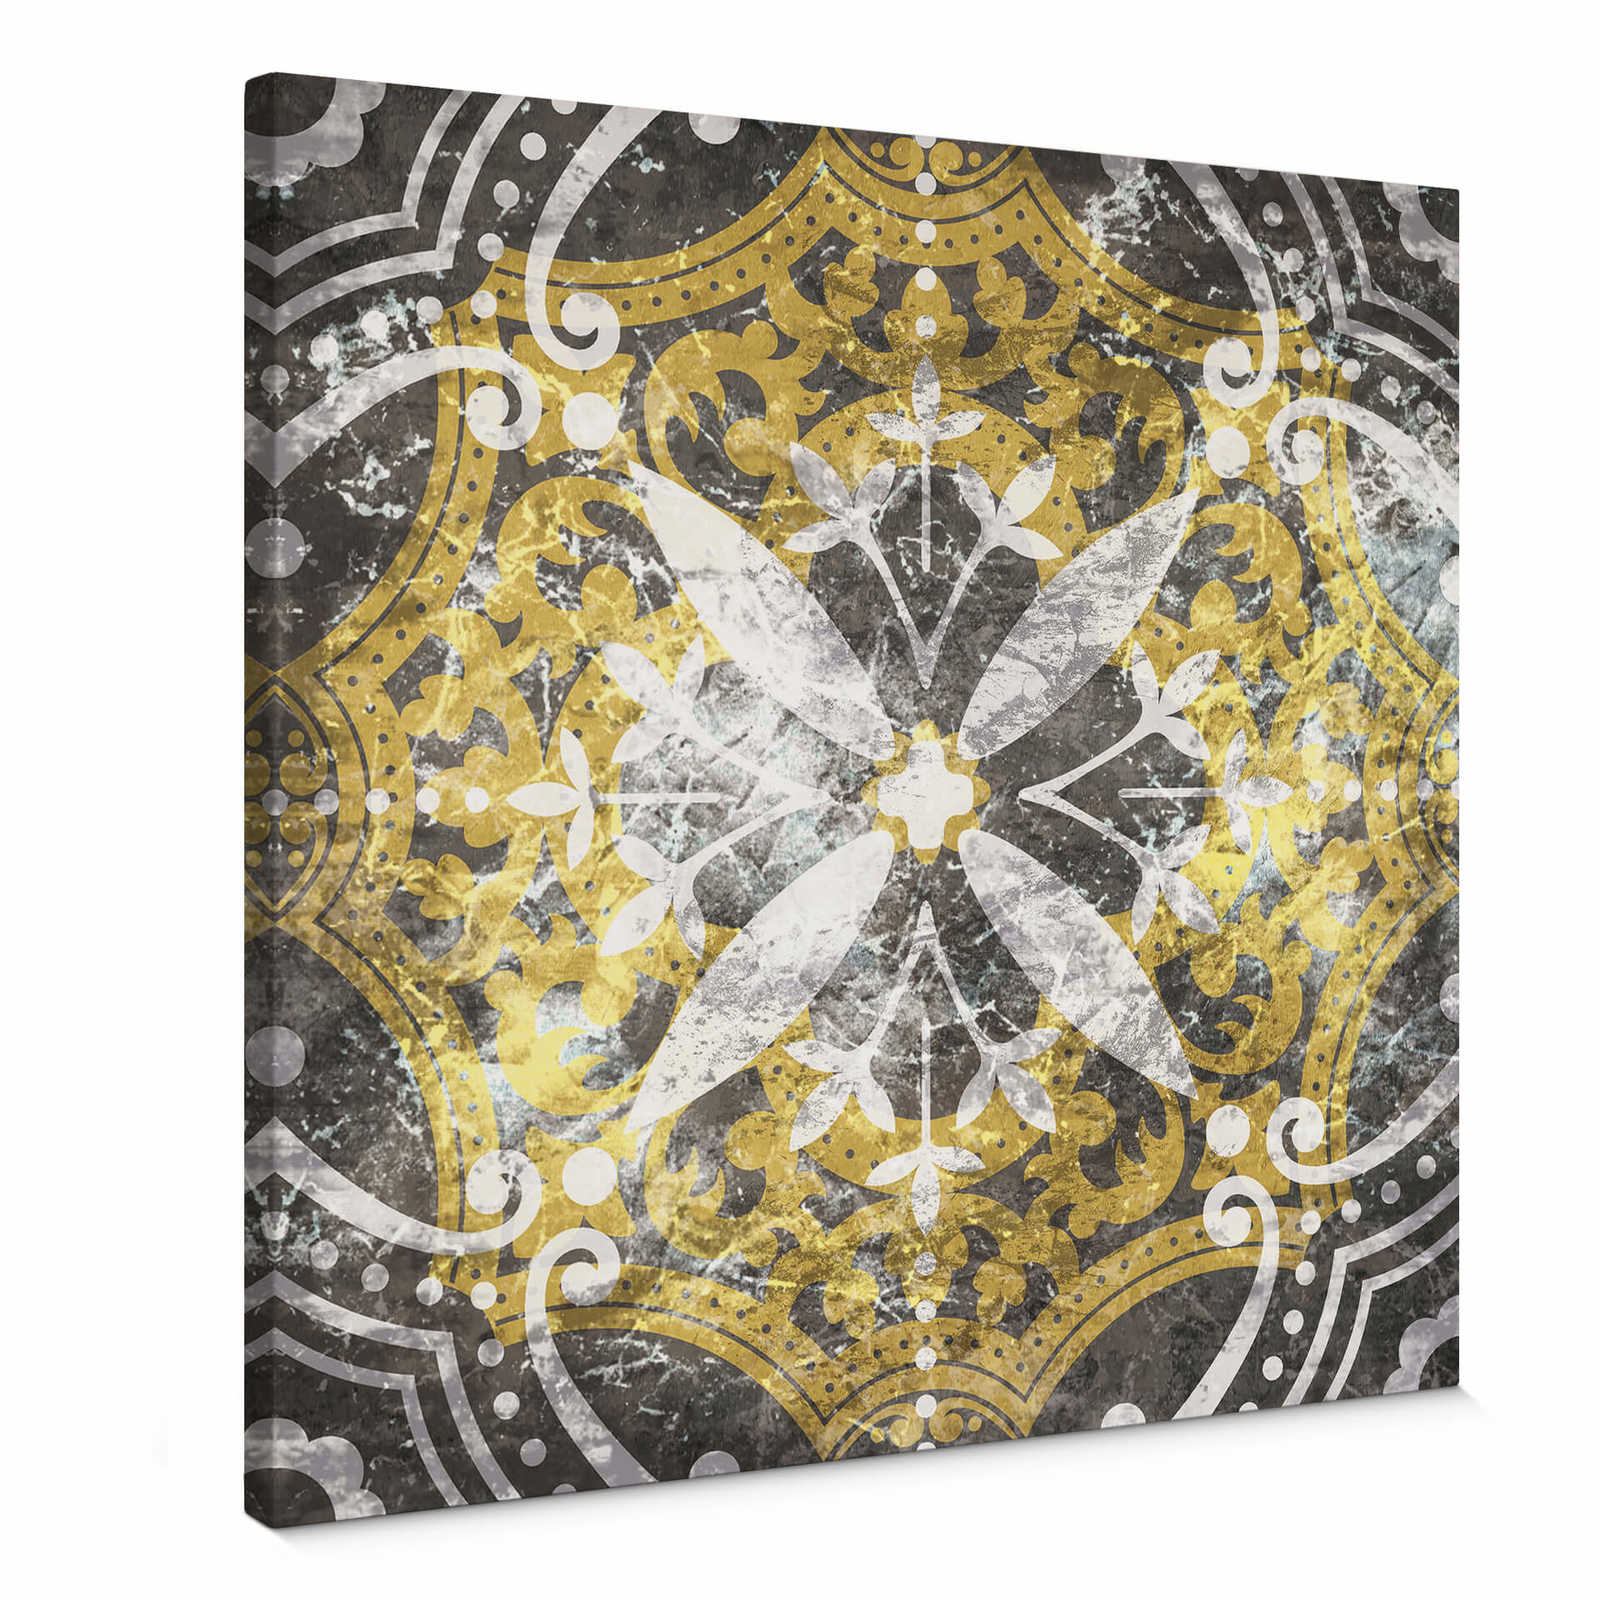         Canvas print square abstract art – blue, yellow
    